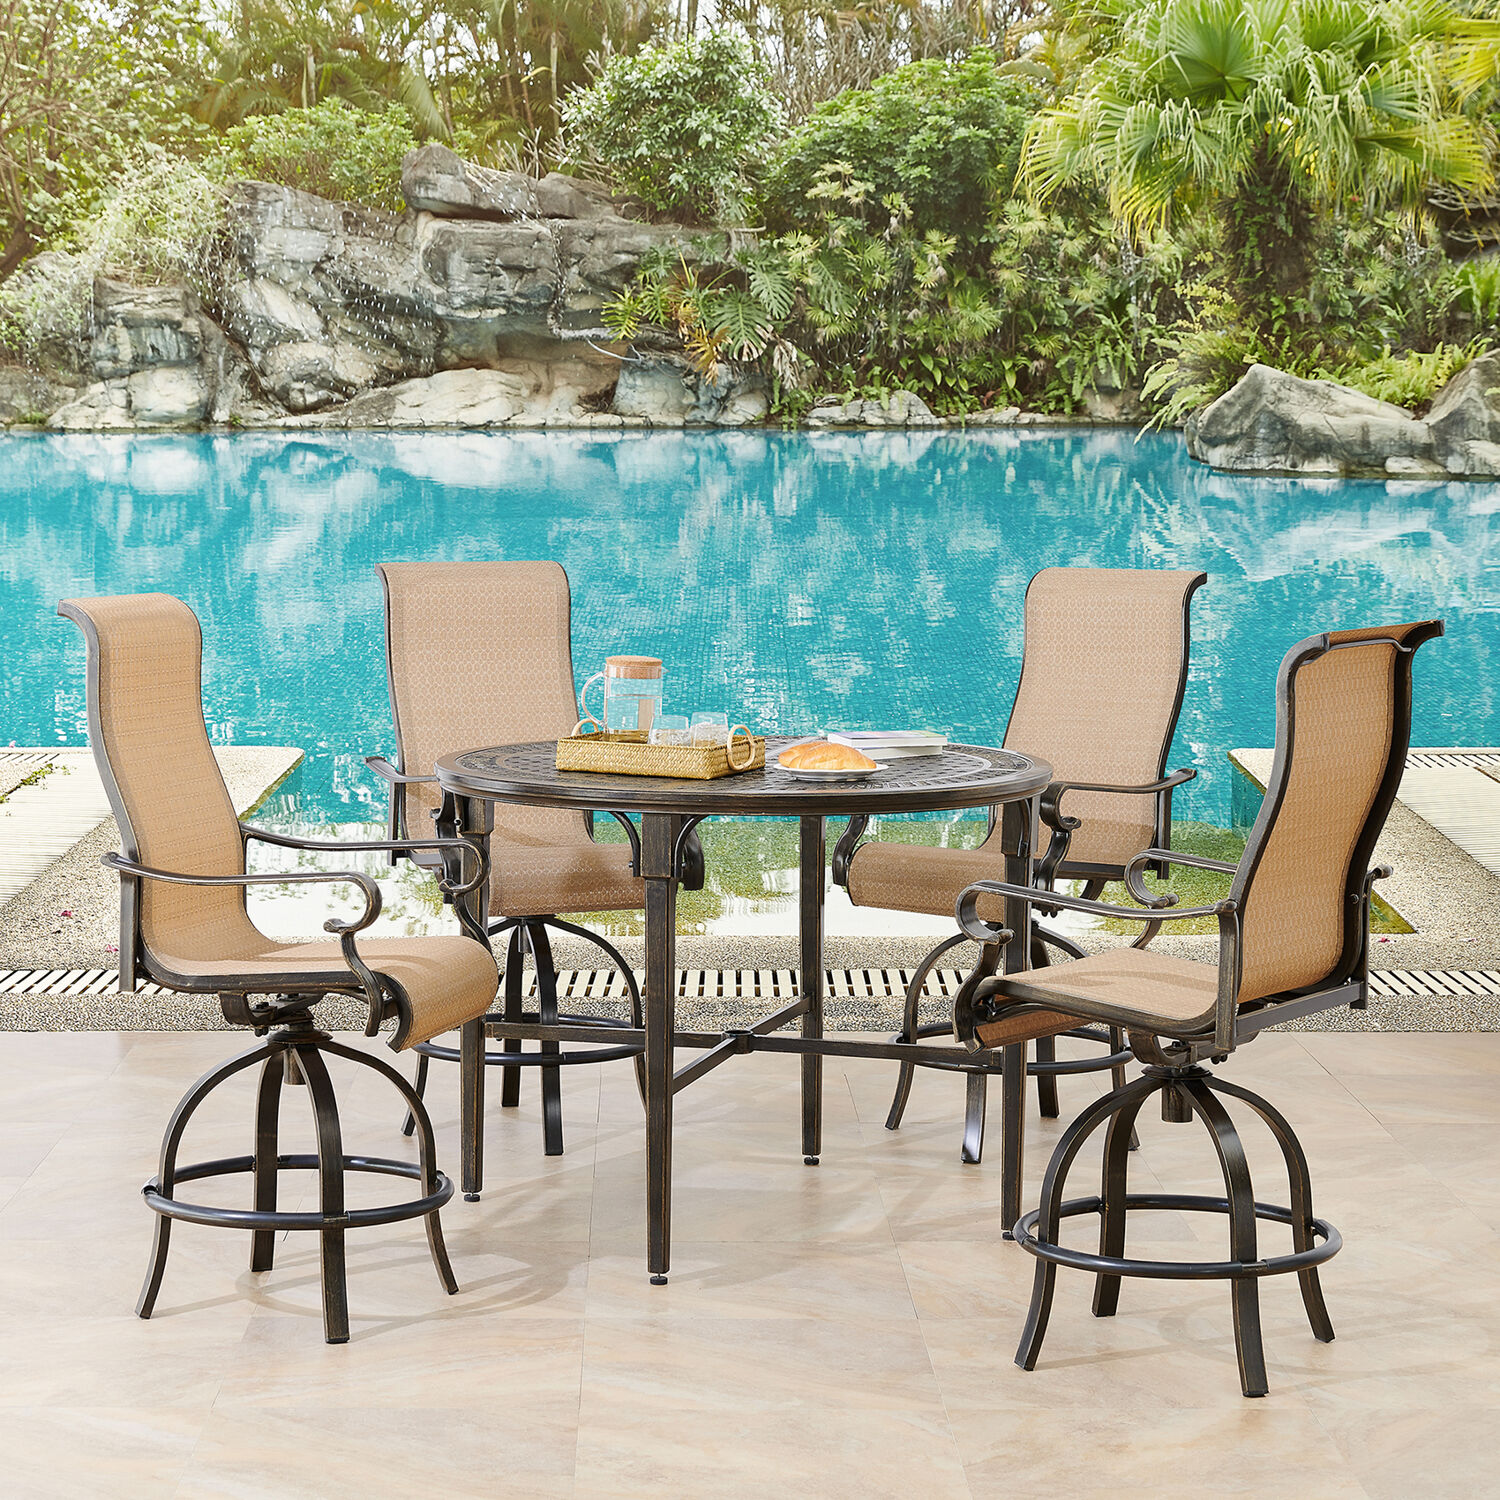 Hanover Brigantine 5-Piece Outdoor High-Dining Set with 4 Contoured-Sling Swivel Chairs and a 50-In. Round Cast-Top Table - image 3 of 9